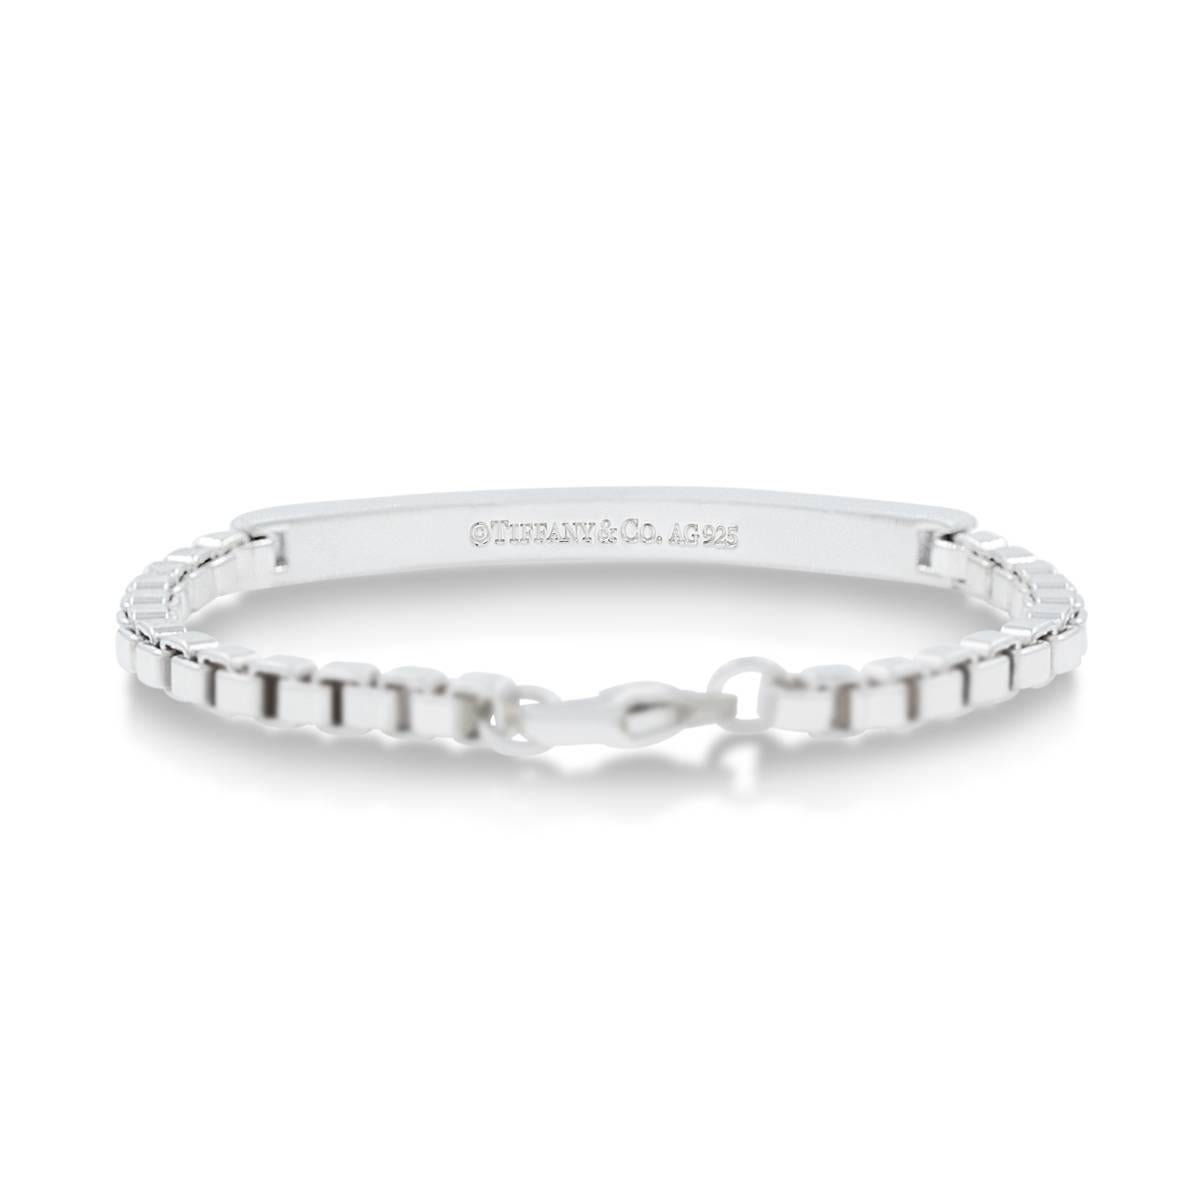 Venetian Link I.D. Bracelet.
This item may be engraved with up to three letters. 
Inspired by ancient Roman arches. Men's bracelet in sterling silver. 7.25